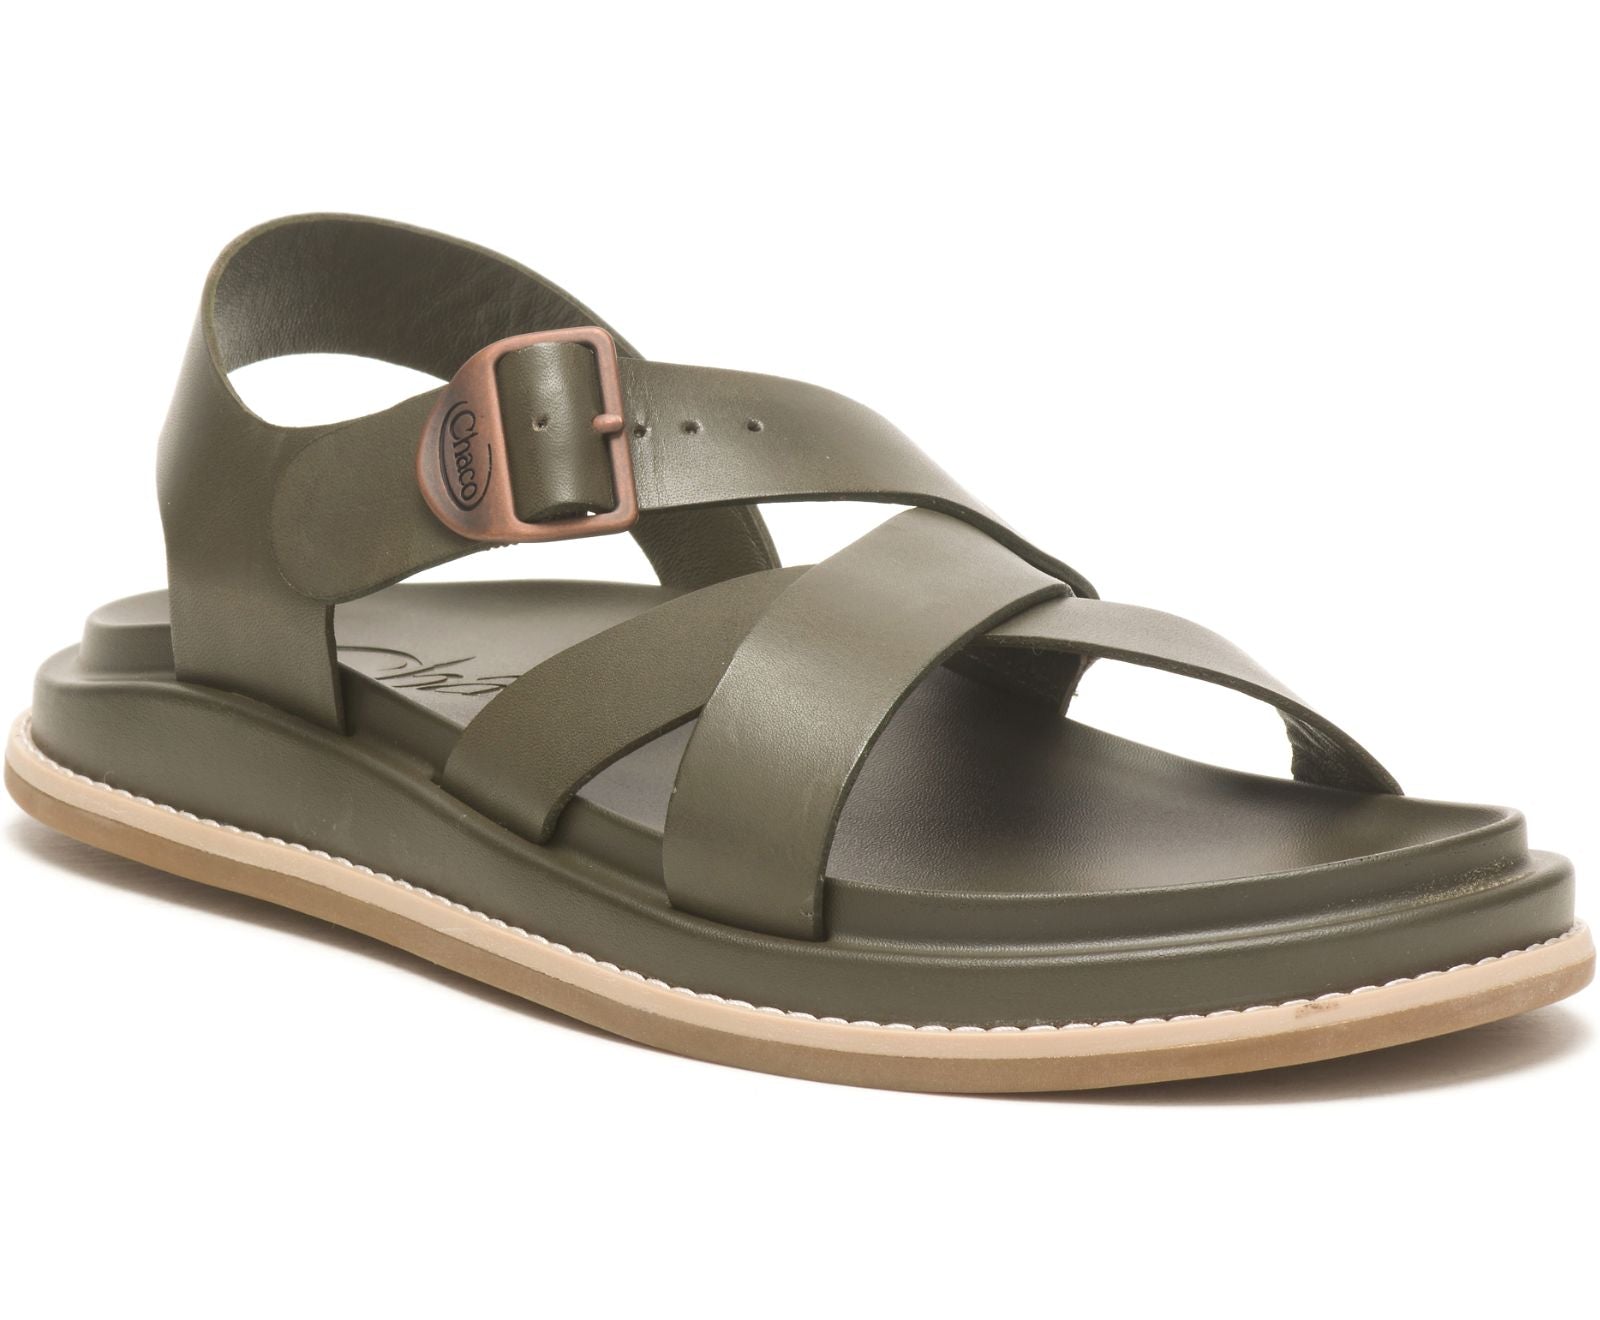 Women's Sandals | Chaco | Sandals, Chacos sandals, Leather women